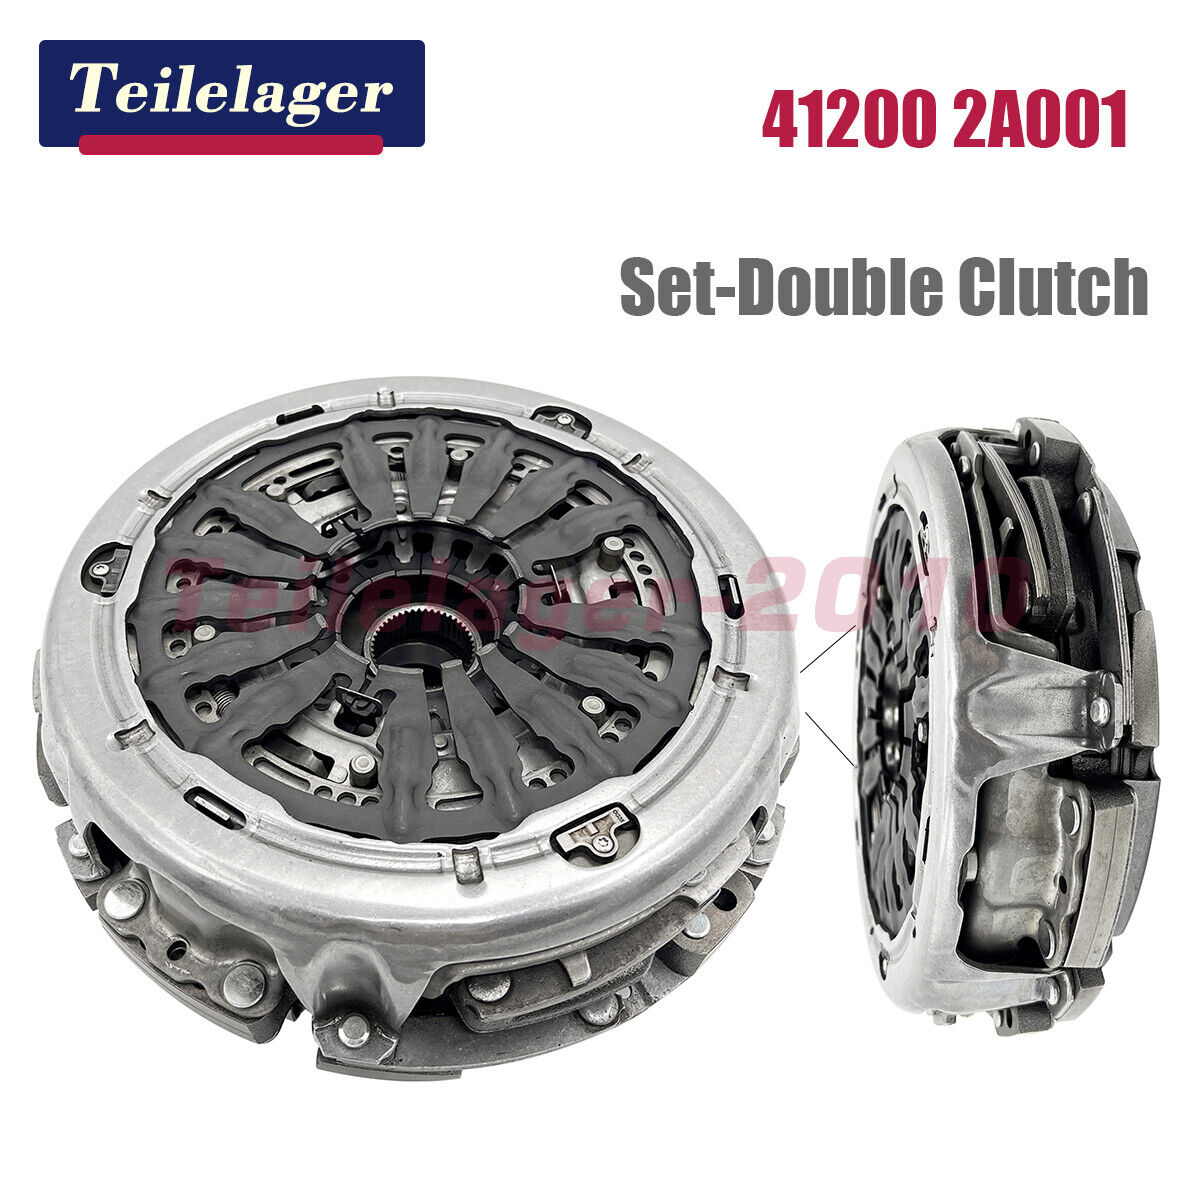  Set-Double Clutch 41200-2A001 For Hyundai Veloster 1.6L 2012-2017